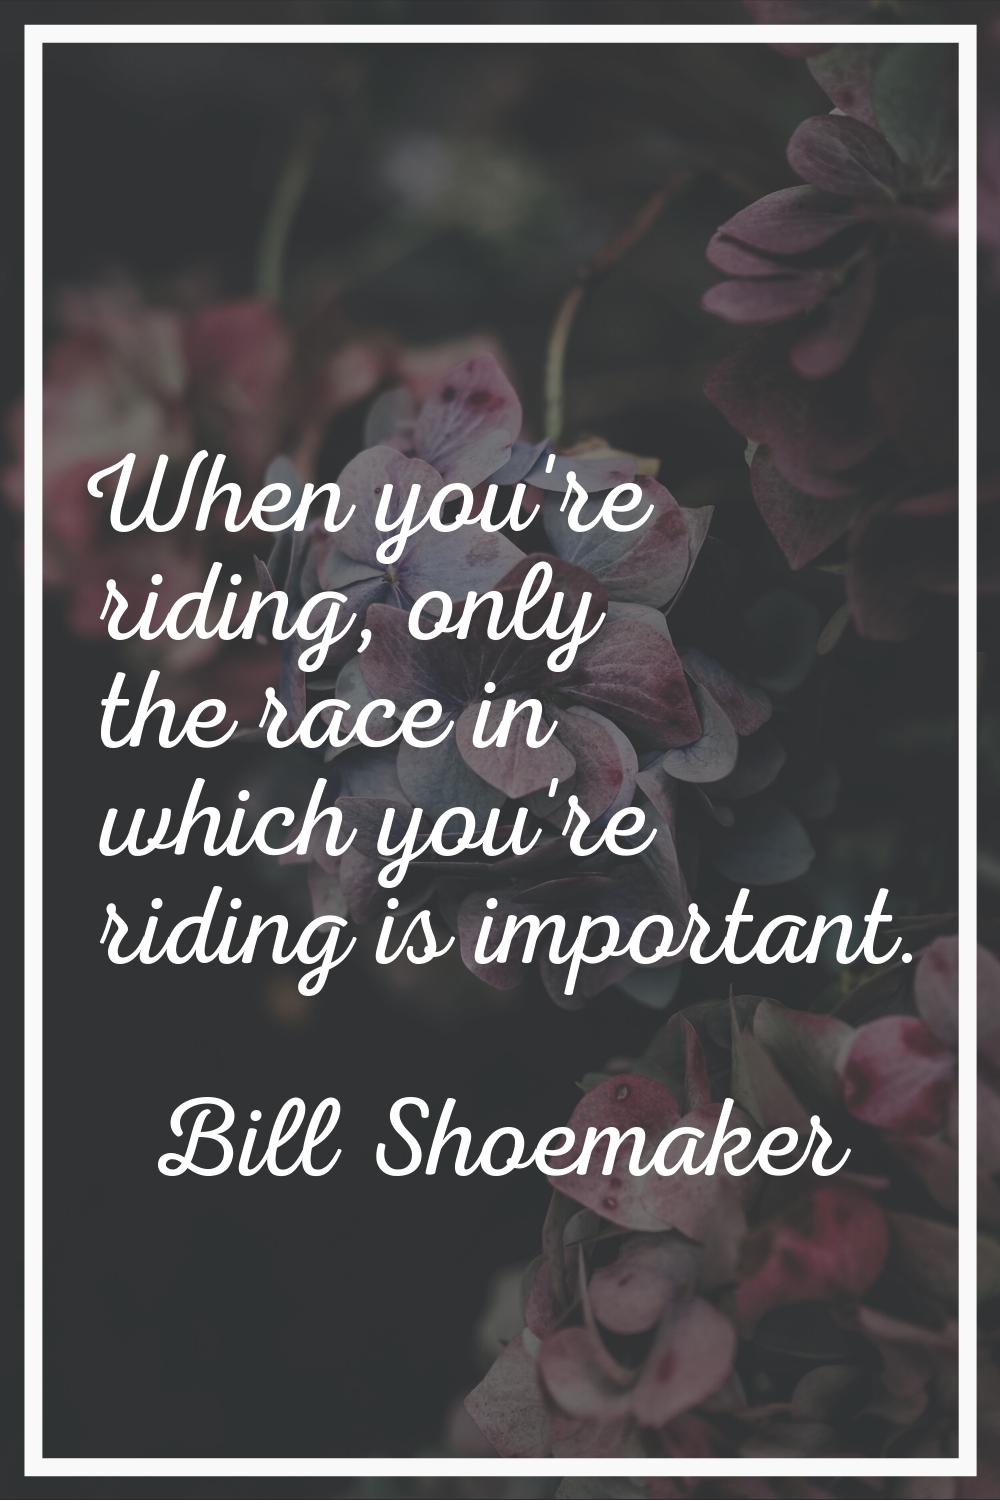 When you're riding, only the race in which you're riding is important.